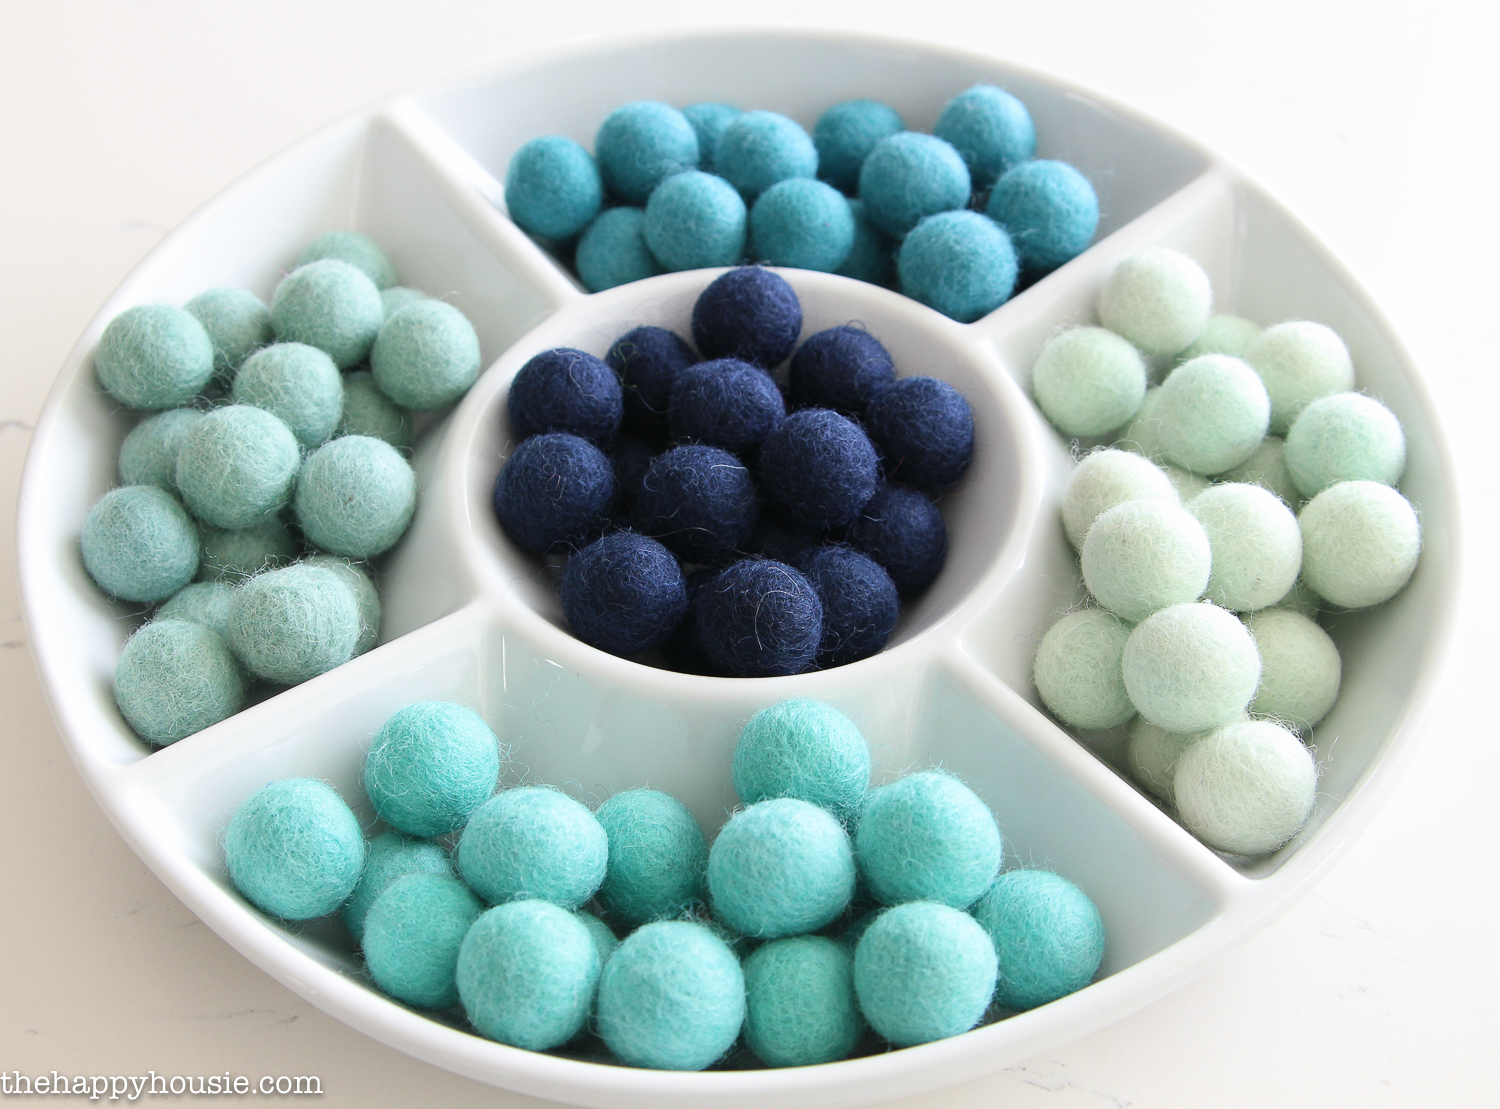 The felt balls separated into the various shades of colours by using a vegetable tray.